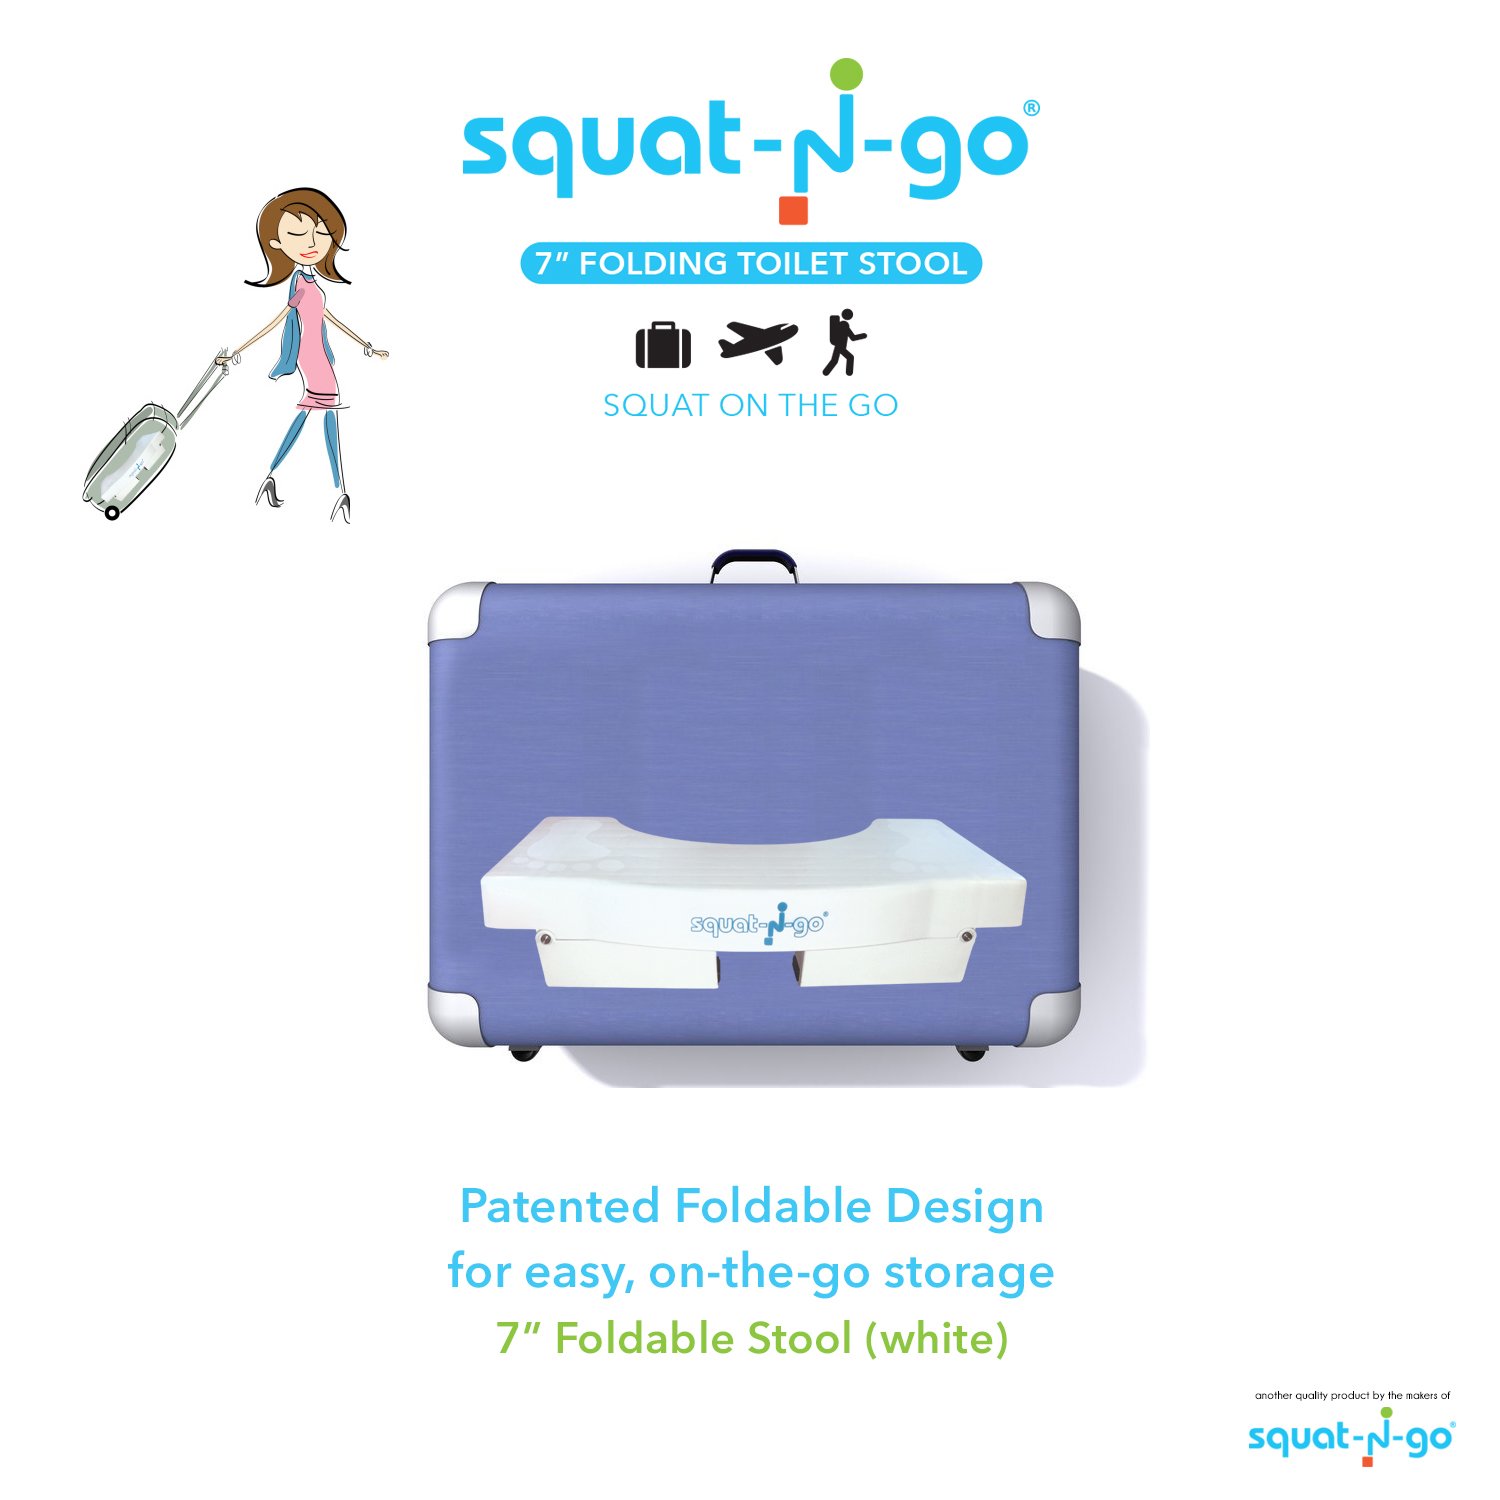 Squat N Go Folding Squatting Stool | The Only Foldable Toilet Stool | Convenient and Compact Great for Travel | Fits All Toilets, Folds for Easy Storage, Use in Any Bathroom | White Color |